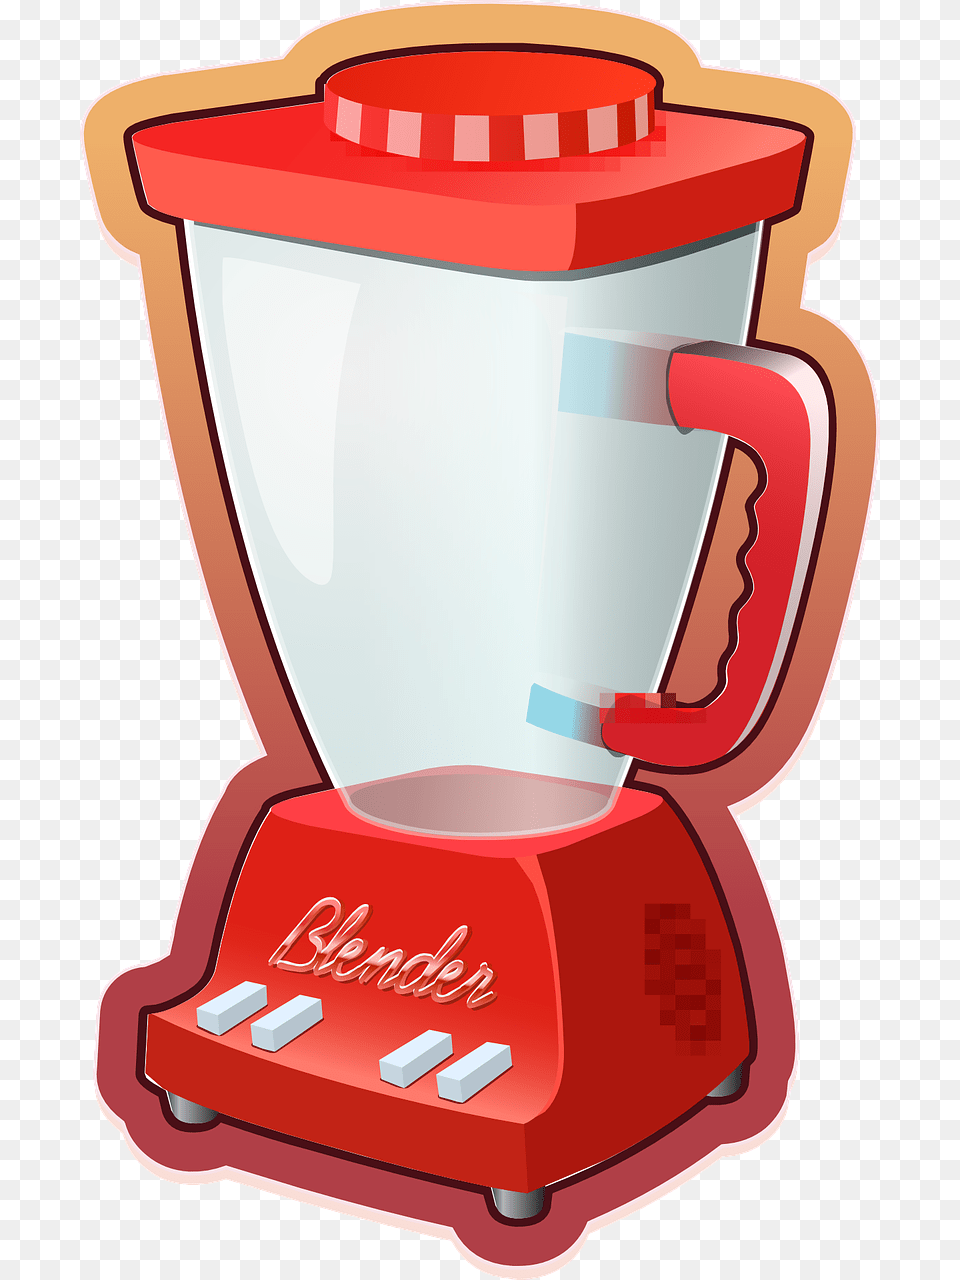 I Made A New, Appliance, Device, Electrical Device, Mixer Png Image